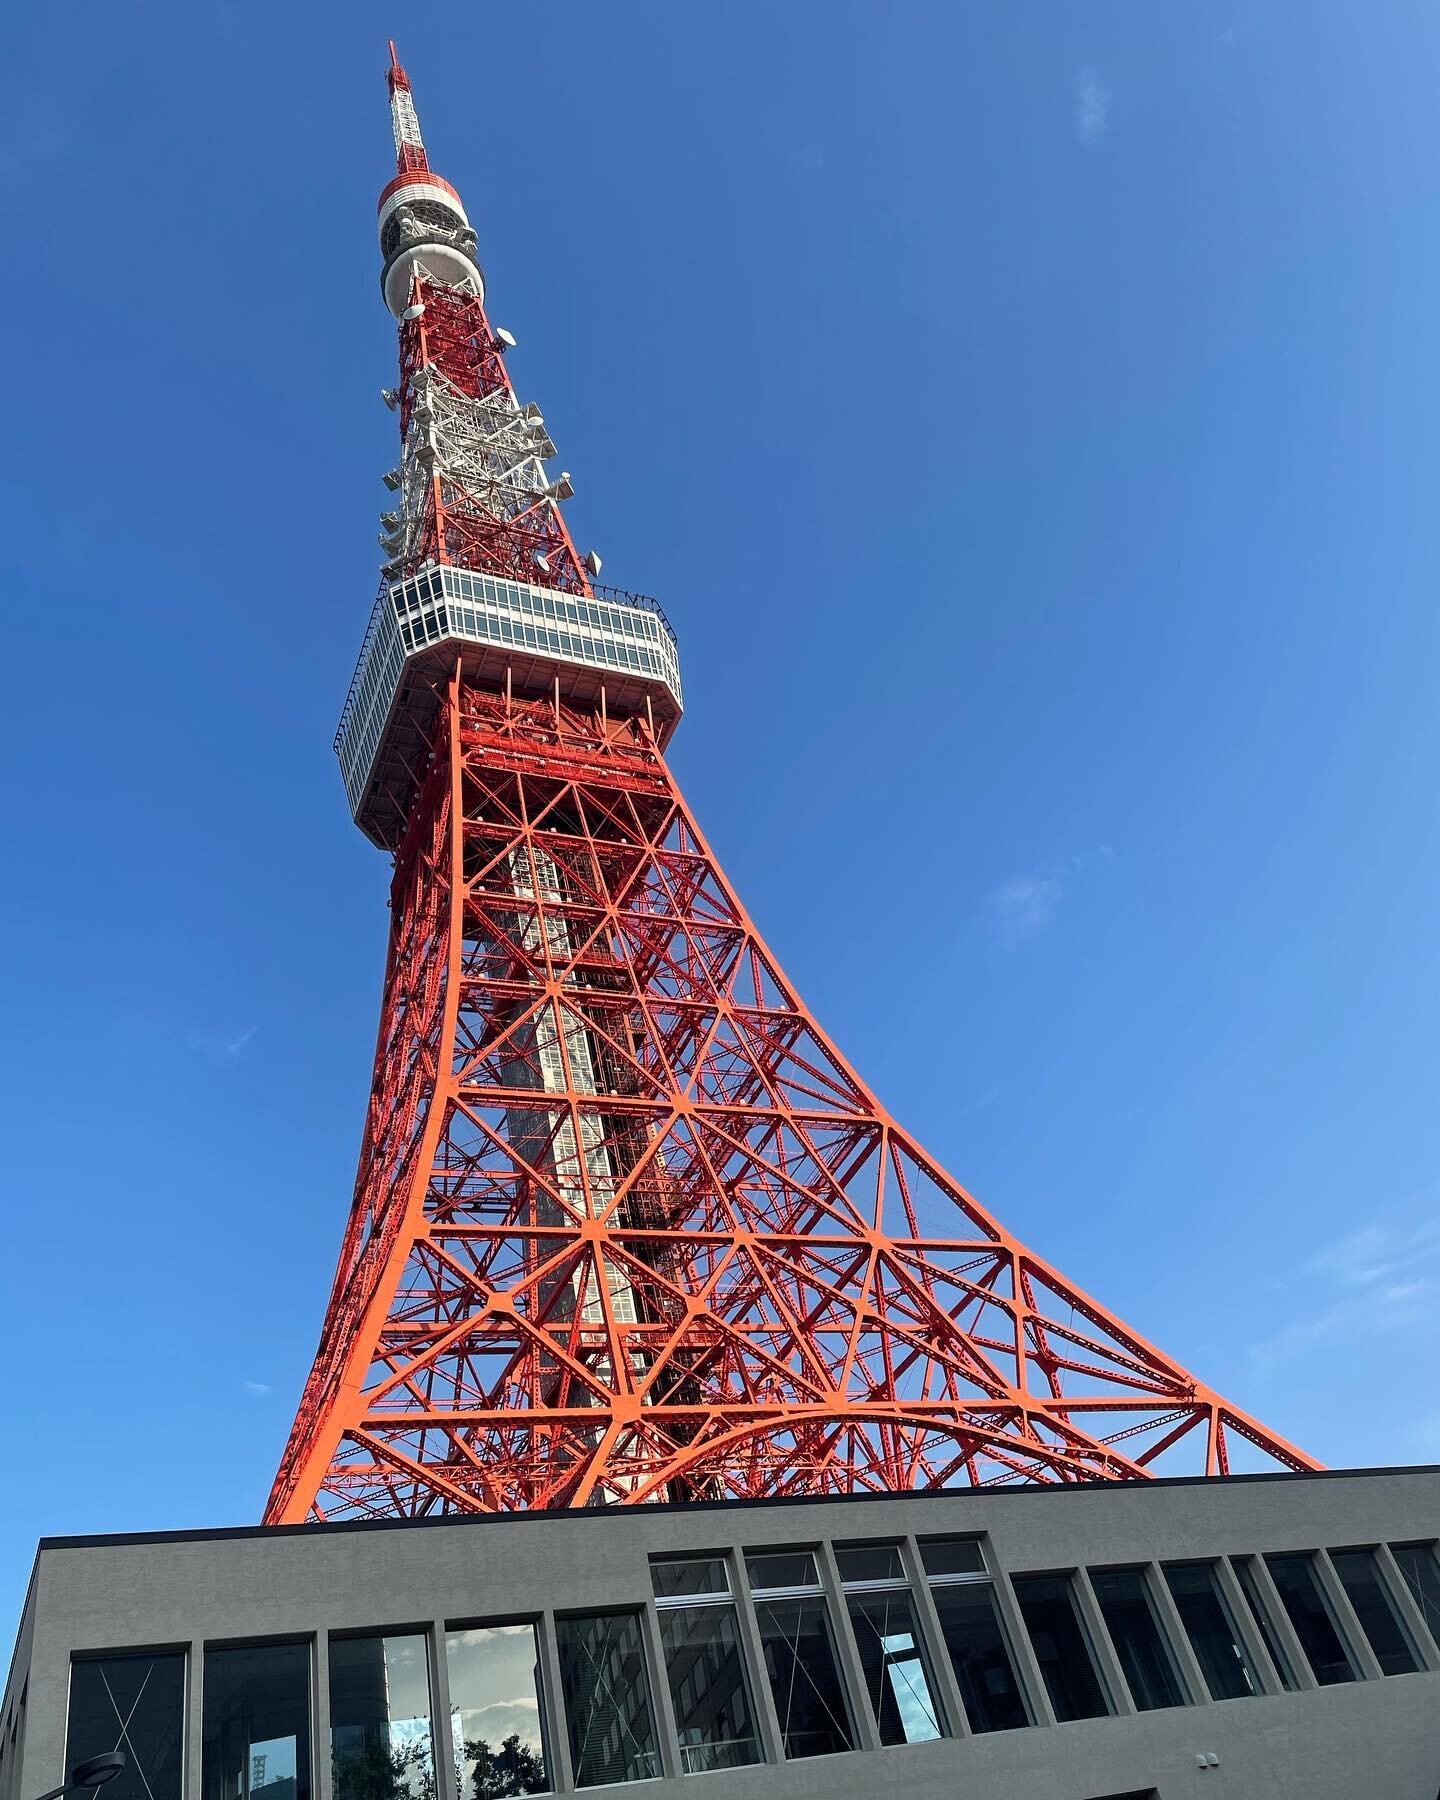 With Comiket 100 in the rear view mirror, it&rsquo;s time to do some proper sightseeing around #tokyo before I have to head out. 

The other day, I popped into #tokyotower🗼 with my buddies @atomicsuperstar and @mountainman.exe 

I hadn&rsquo;t been 